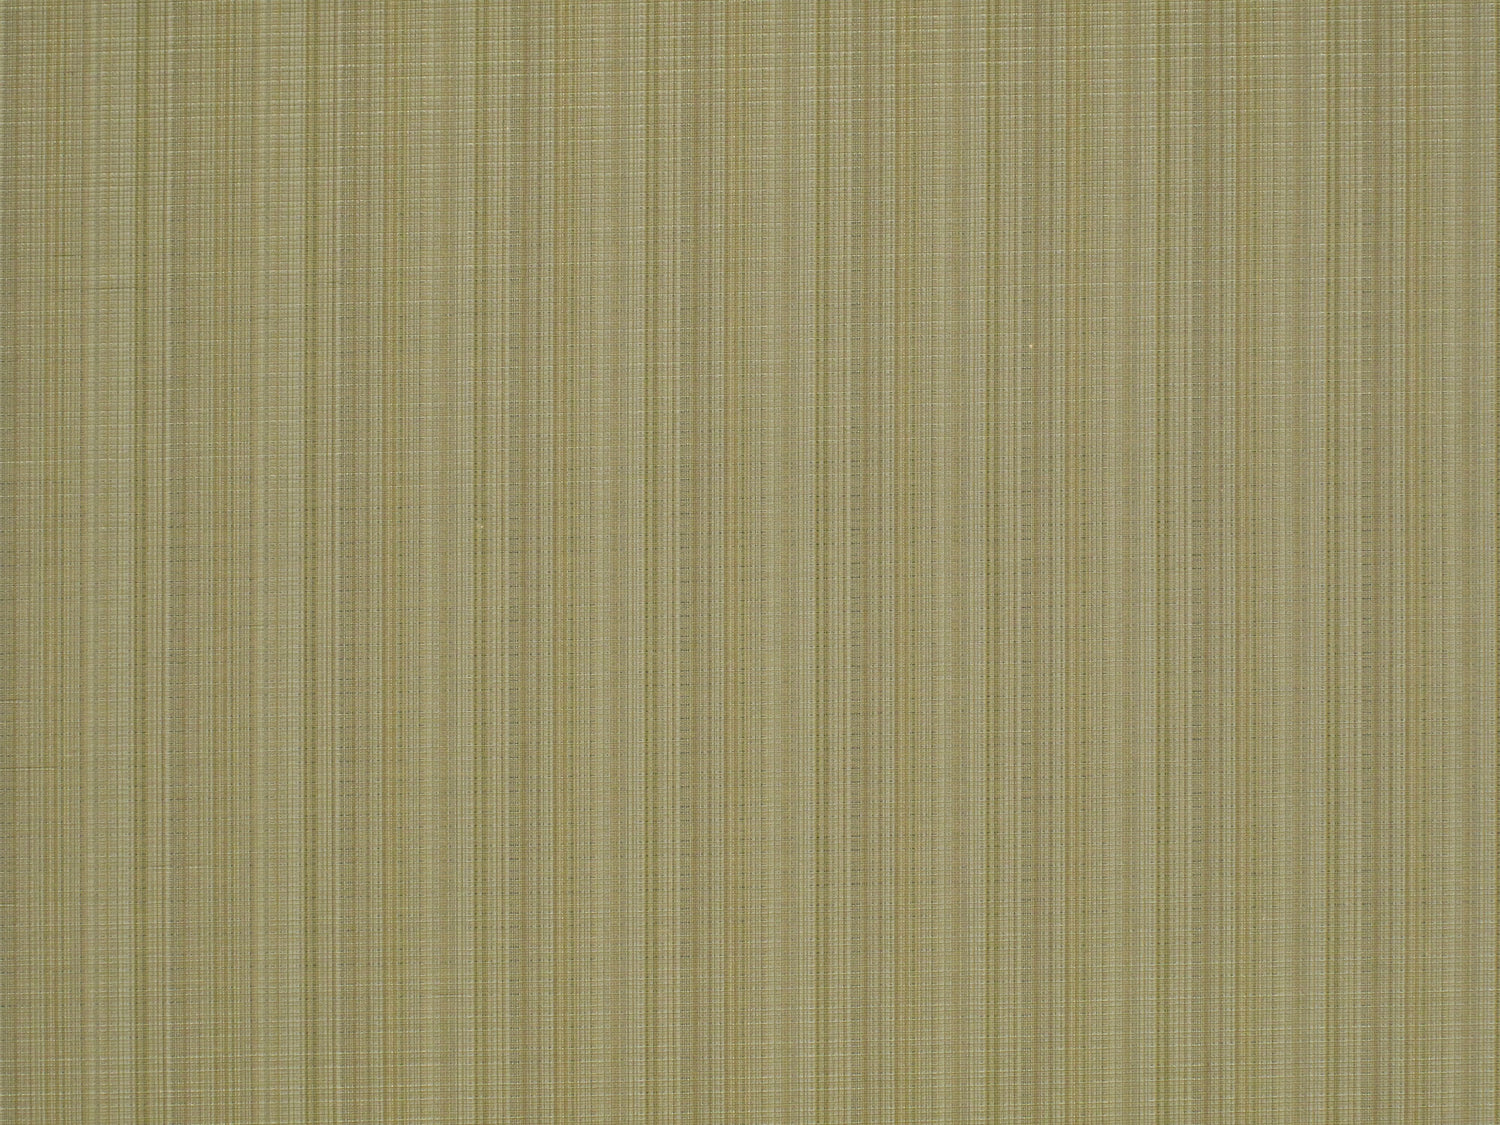 Umbria fabric in grass color - pattern number HB 09042504 - by Scalamandre in the Old World Weavers collection